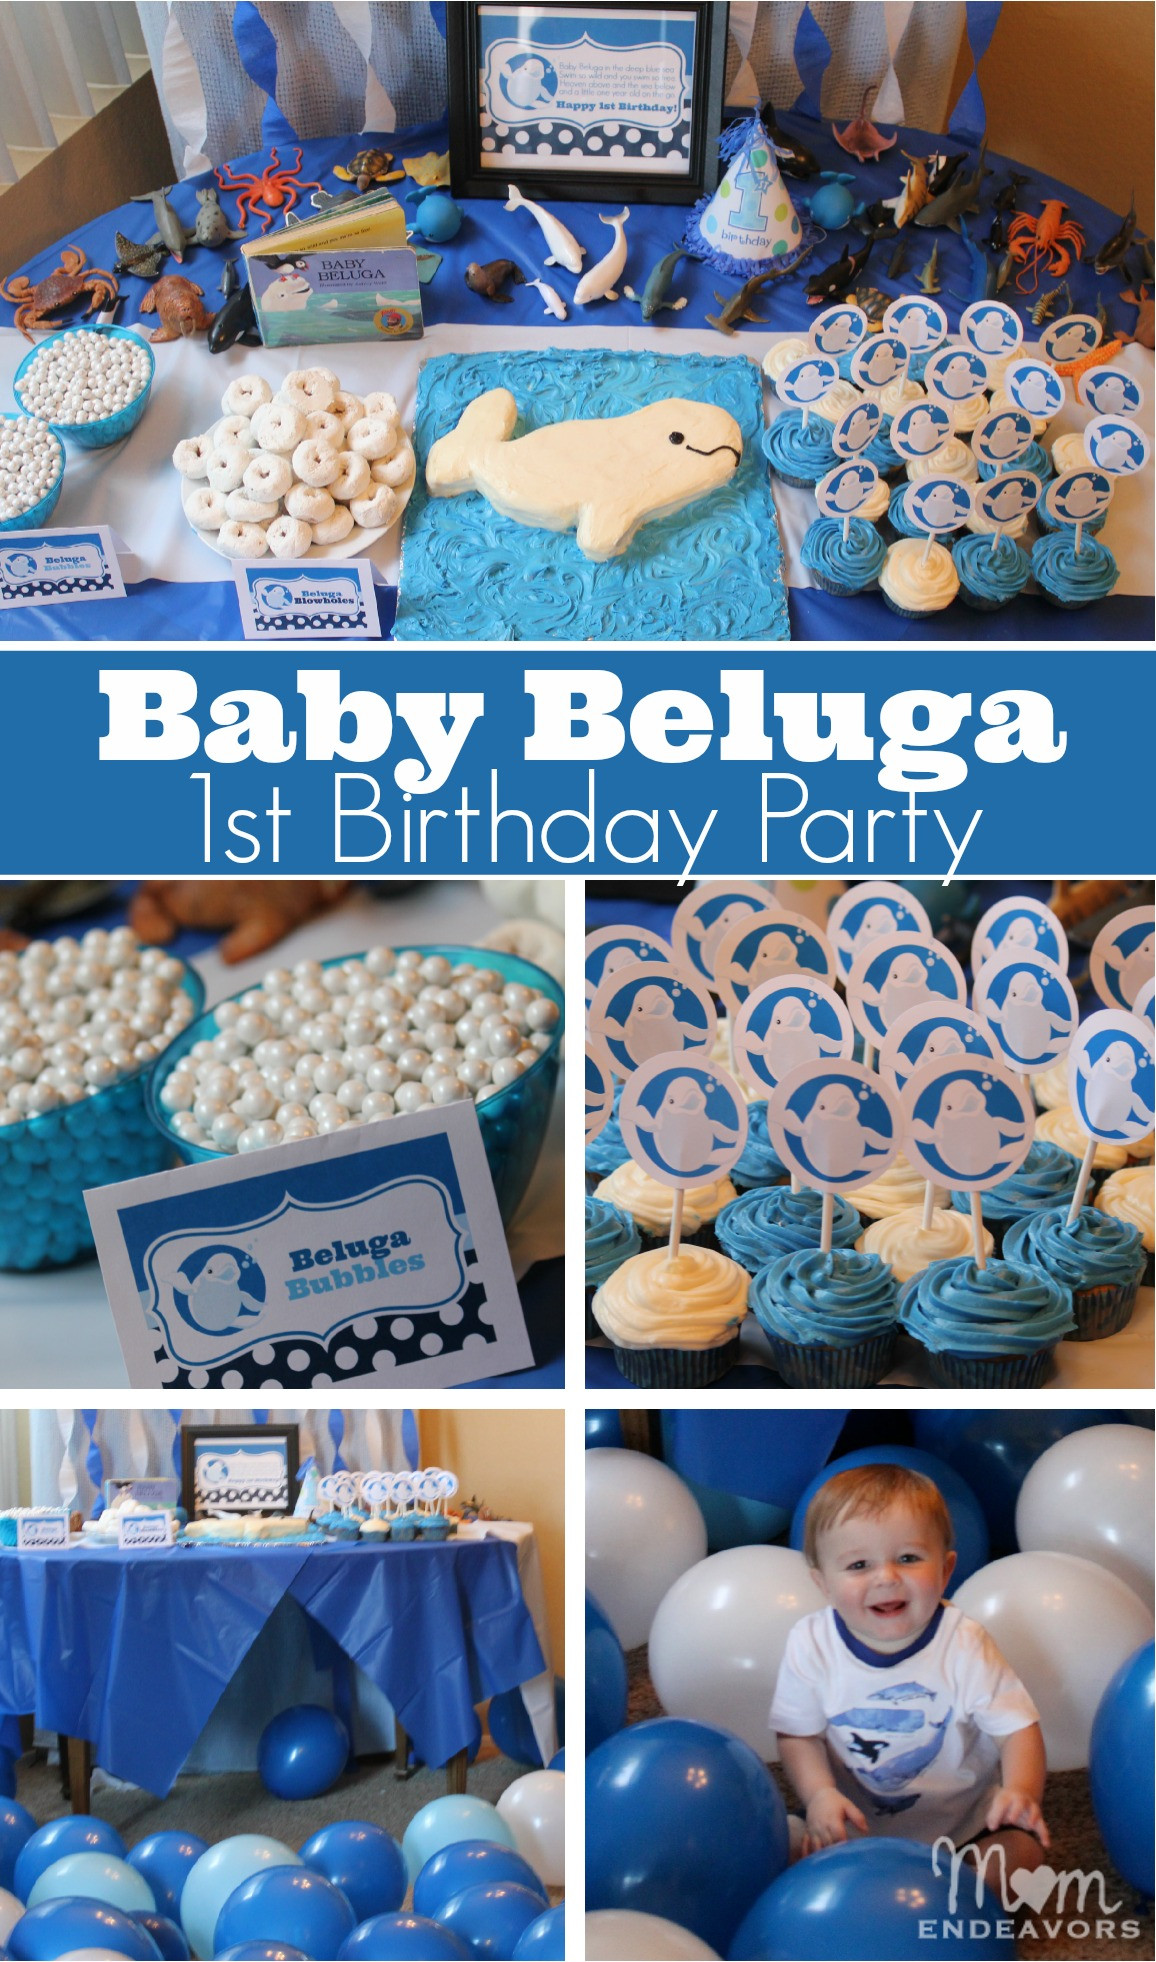 Baby First Birthday Party Supplies
 Baby Beluga 1st Birthday Party